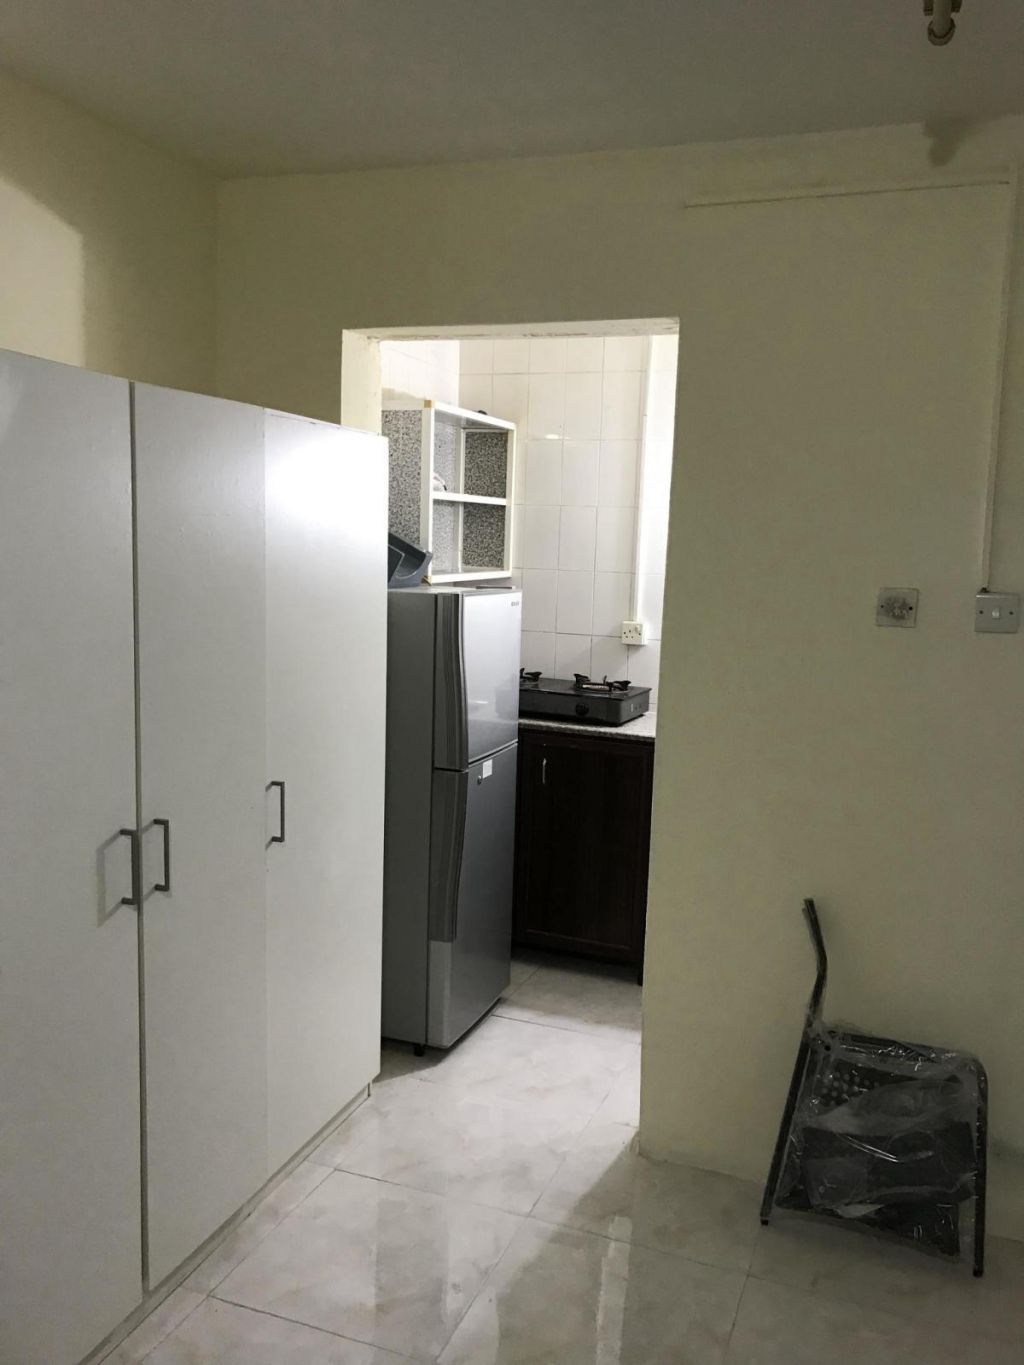 Residential Property 1 Bedroom F/F Apartment  for rent in Old-Airport , Doha-Qatar #16375 - 3  image 